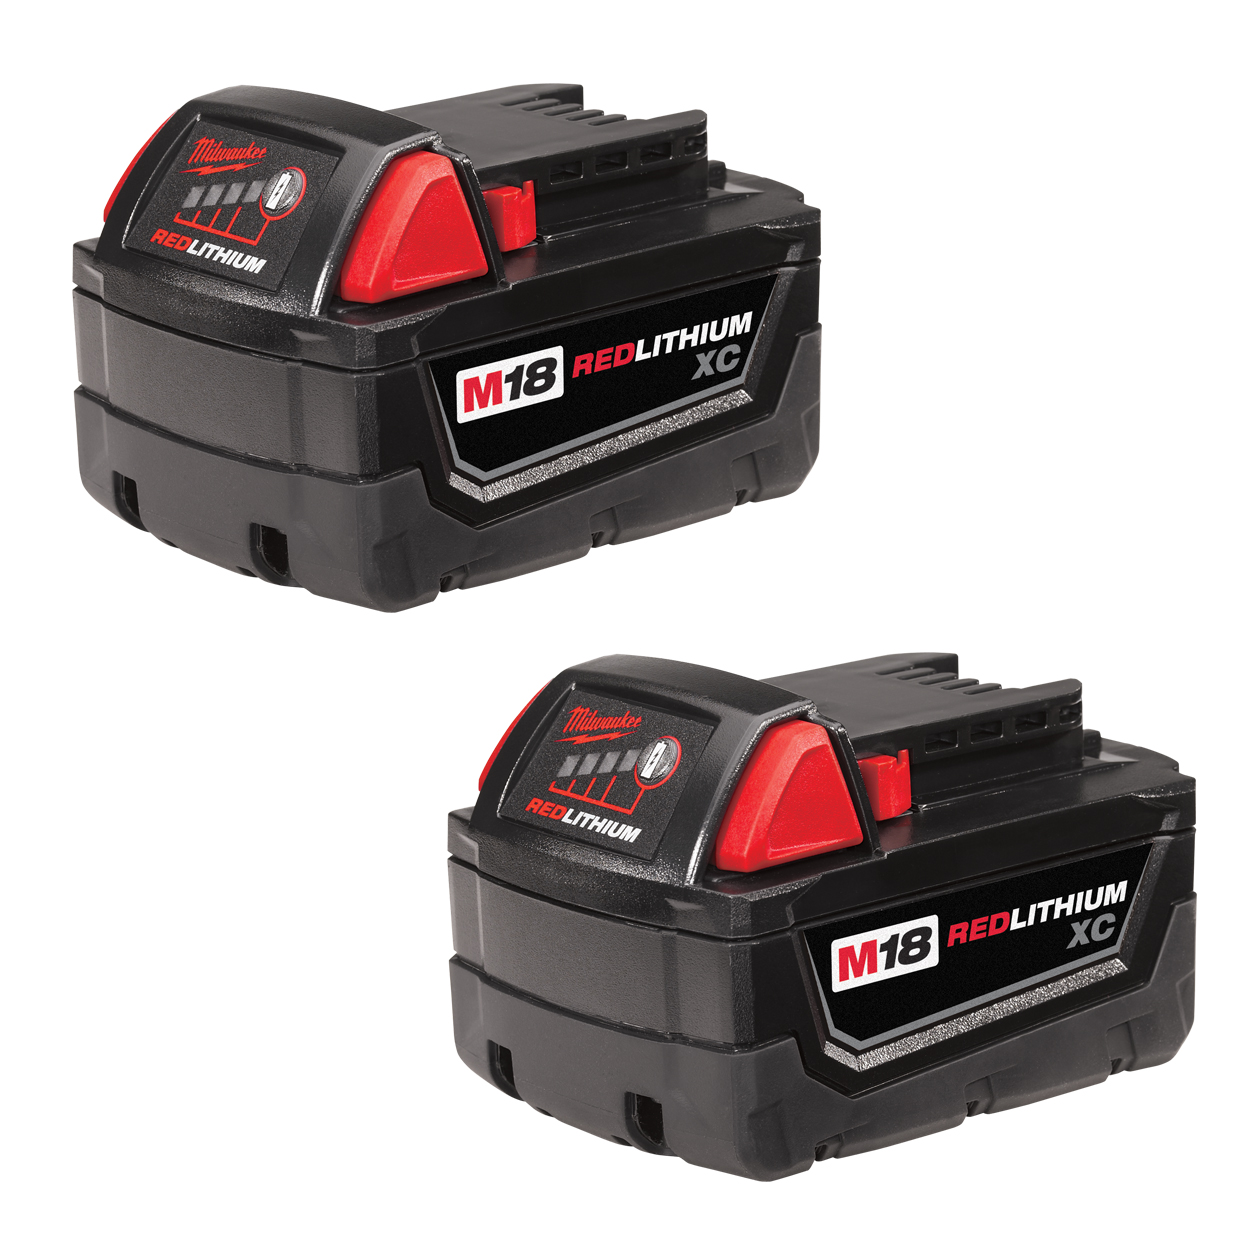 M18 18 Volt Lithium-Ion REDLITHIUM XC Extended Capacity XC3.0 Battery Pack - 2 Pack